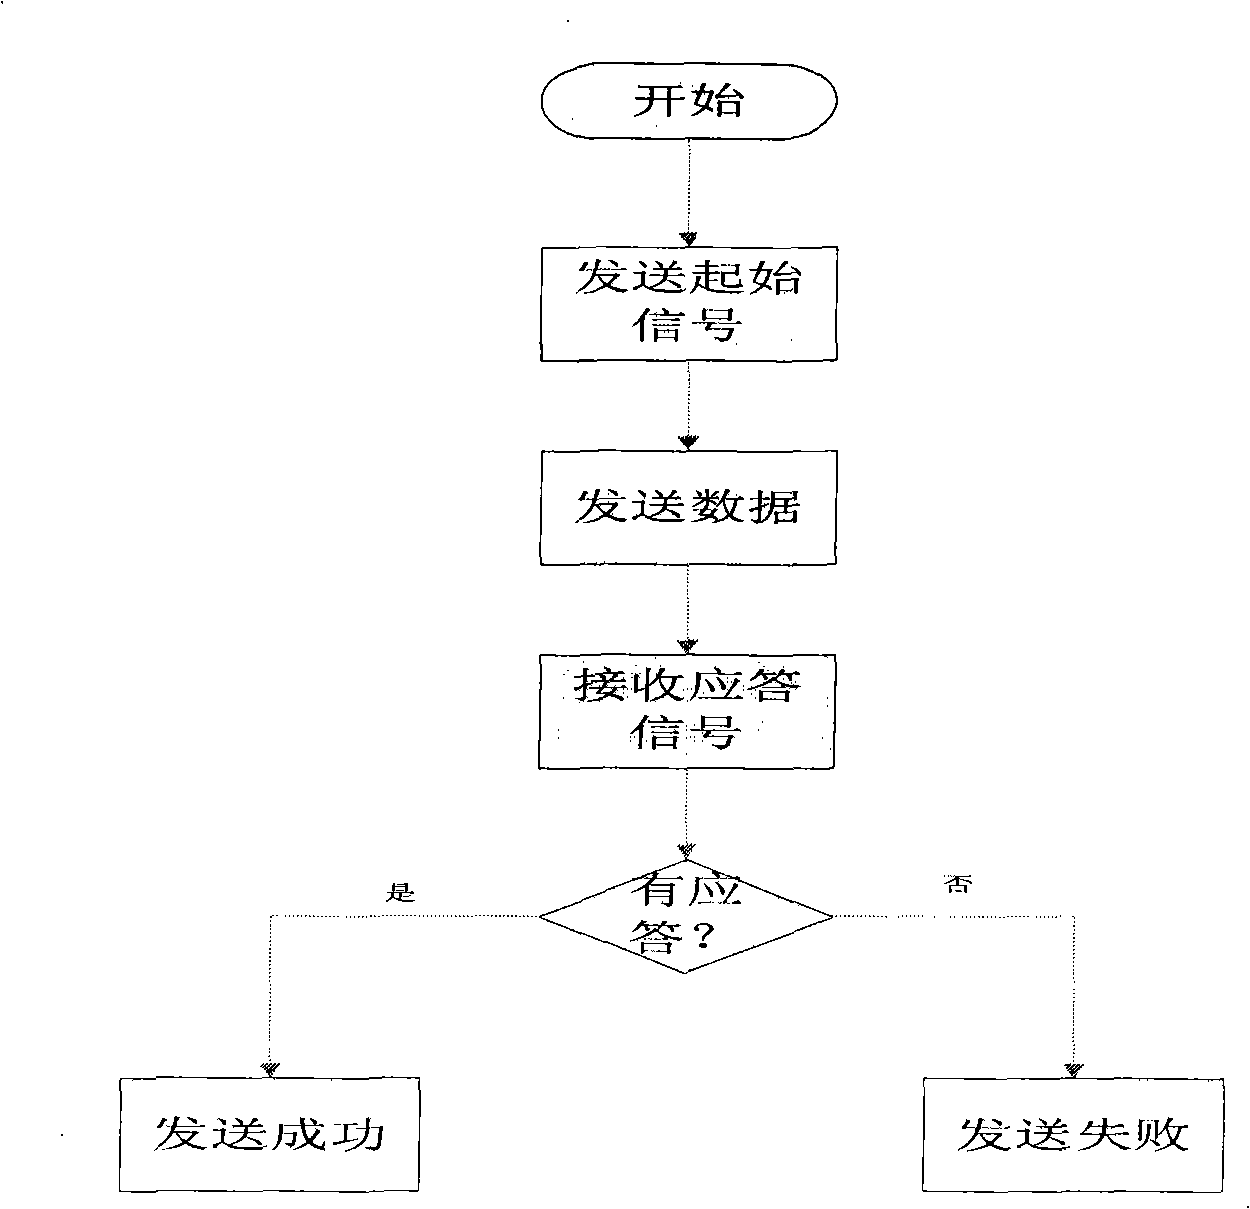 One-wire bus communication method